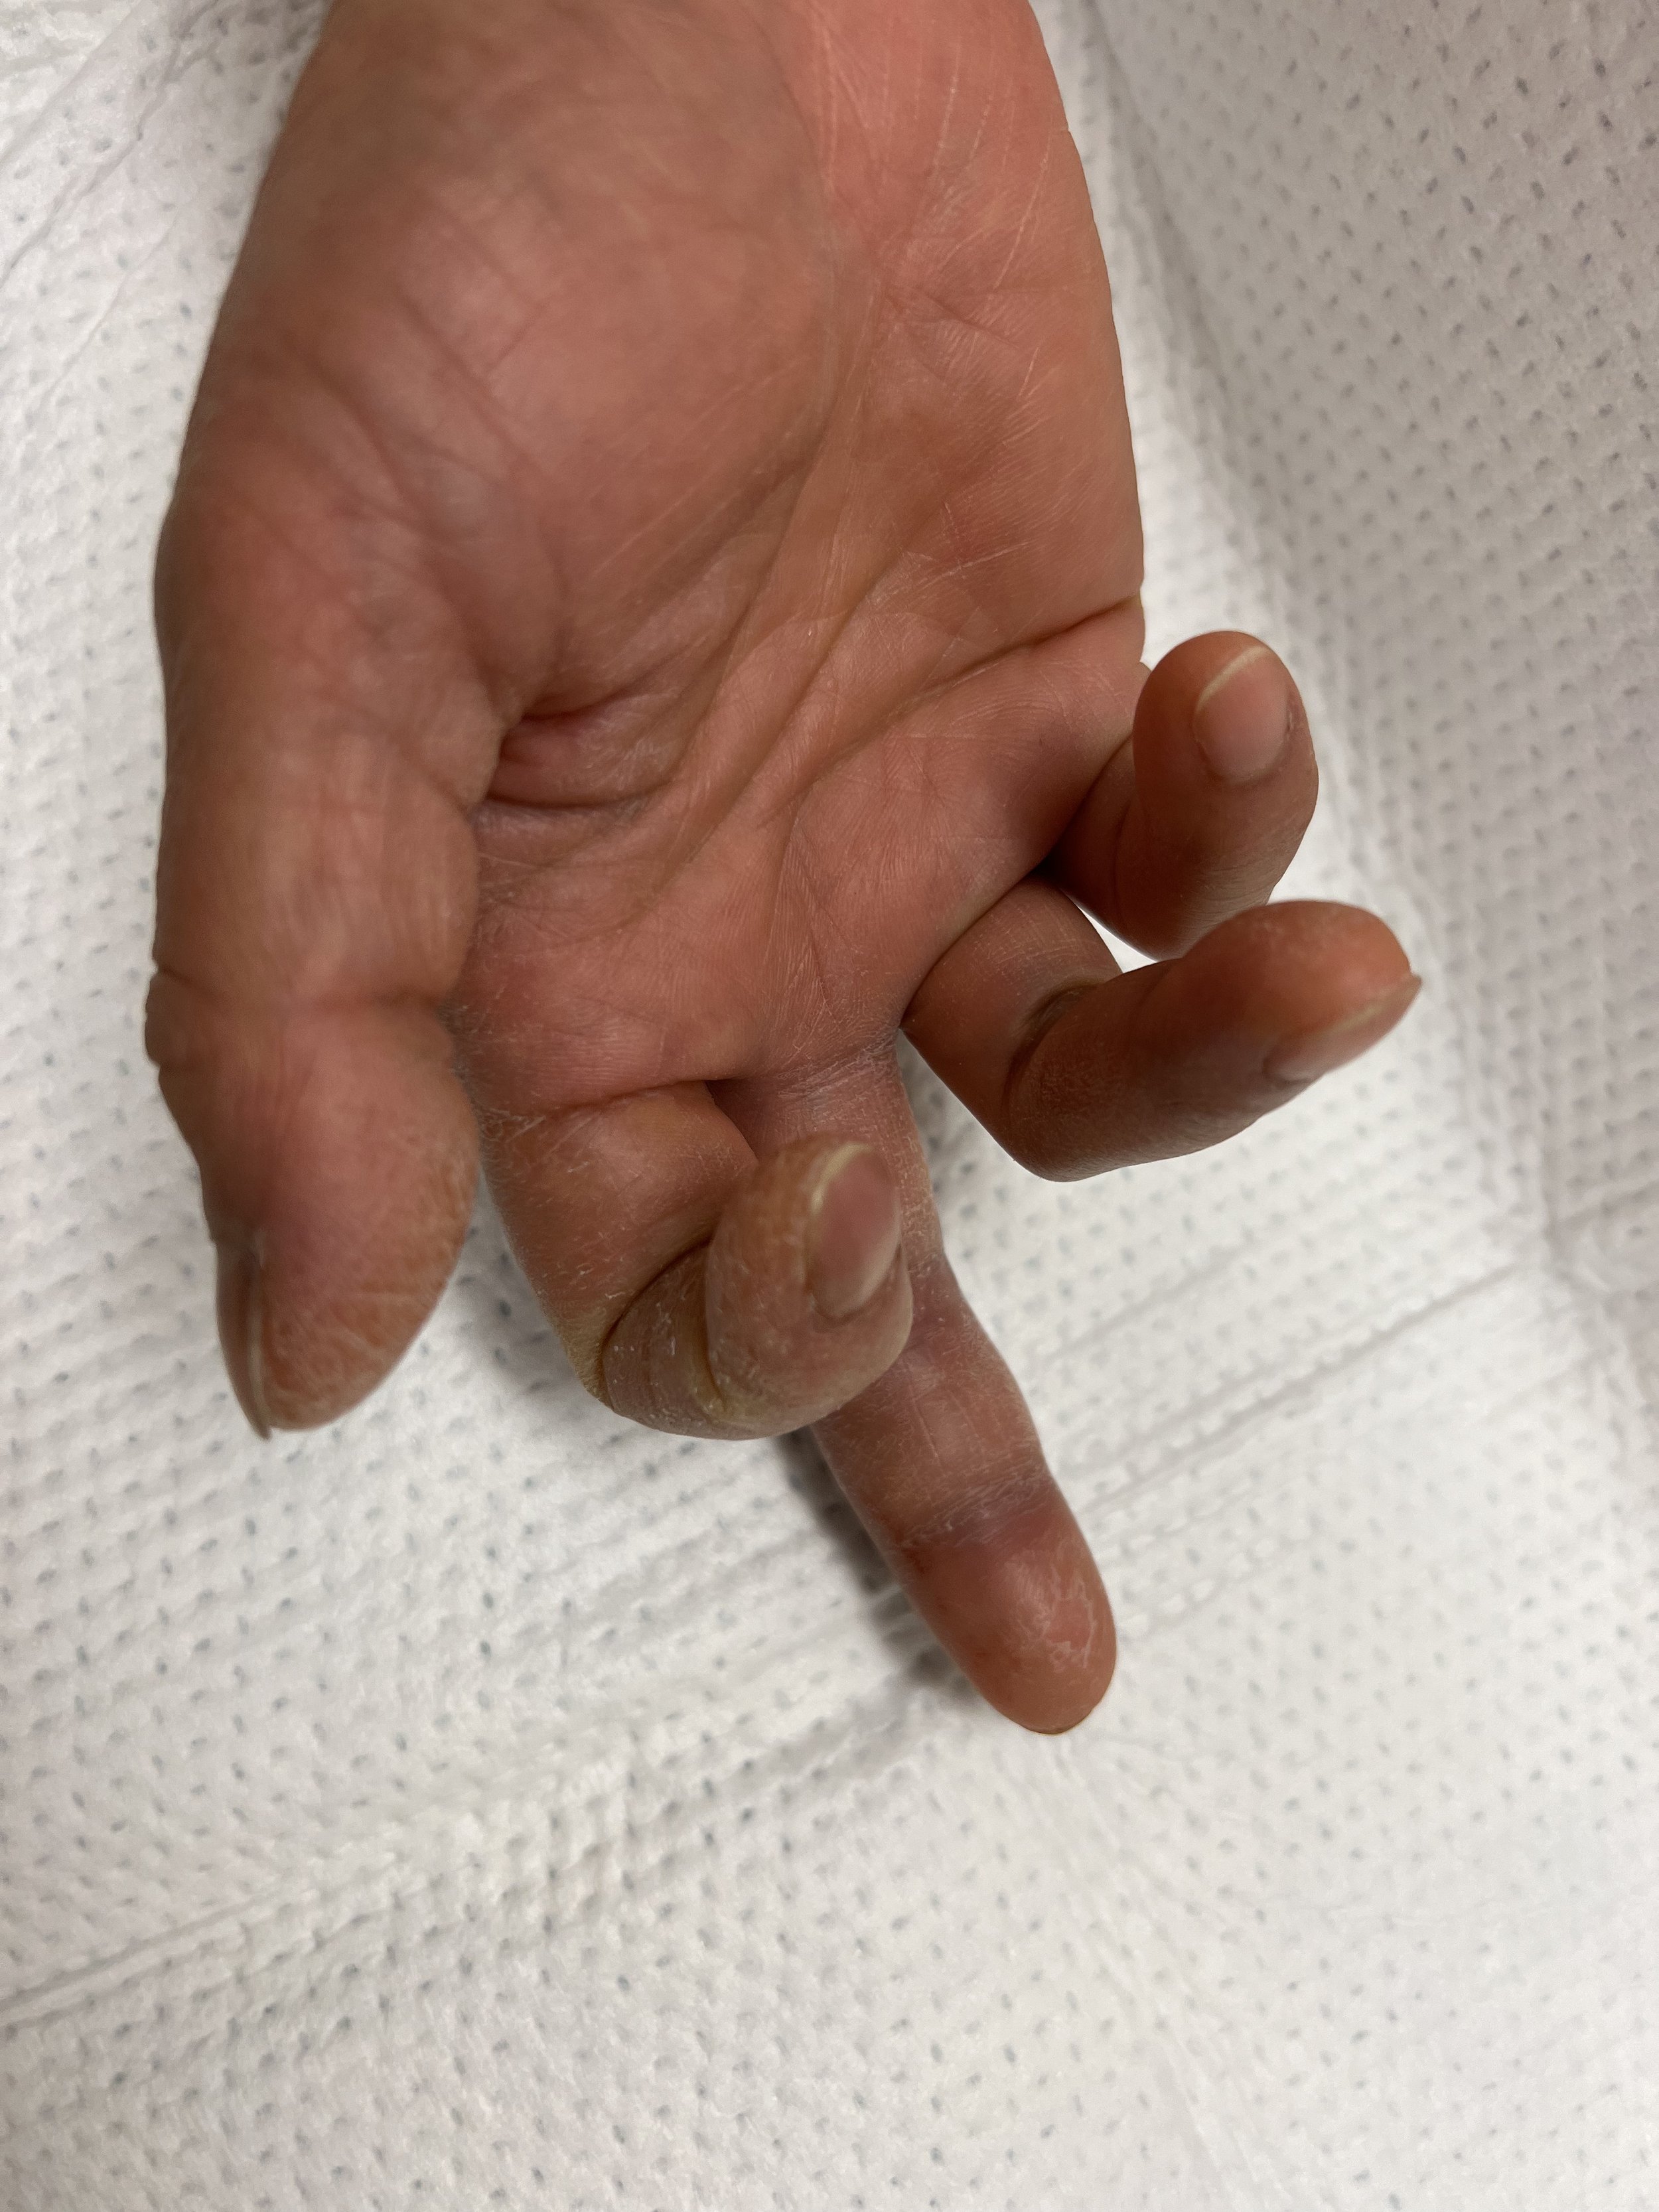 Infected Hangnail: Signs, Treatment, and Prevention